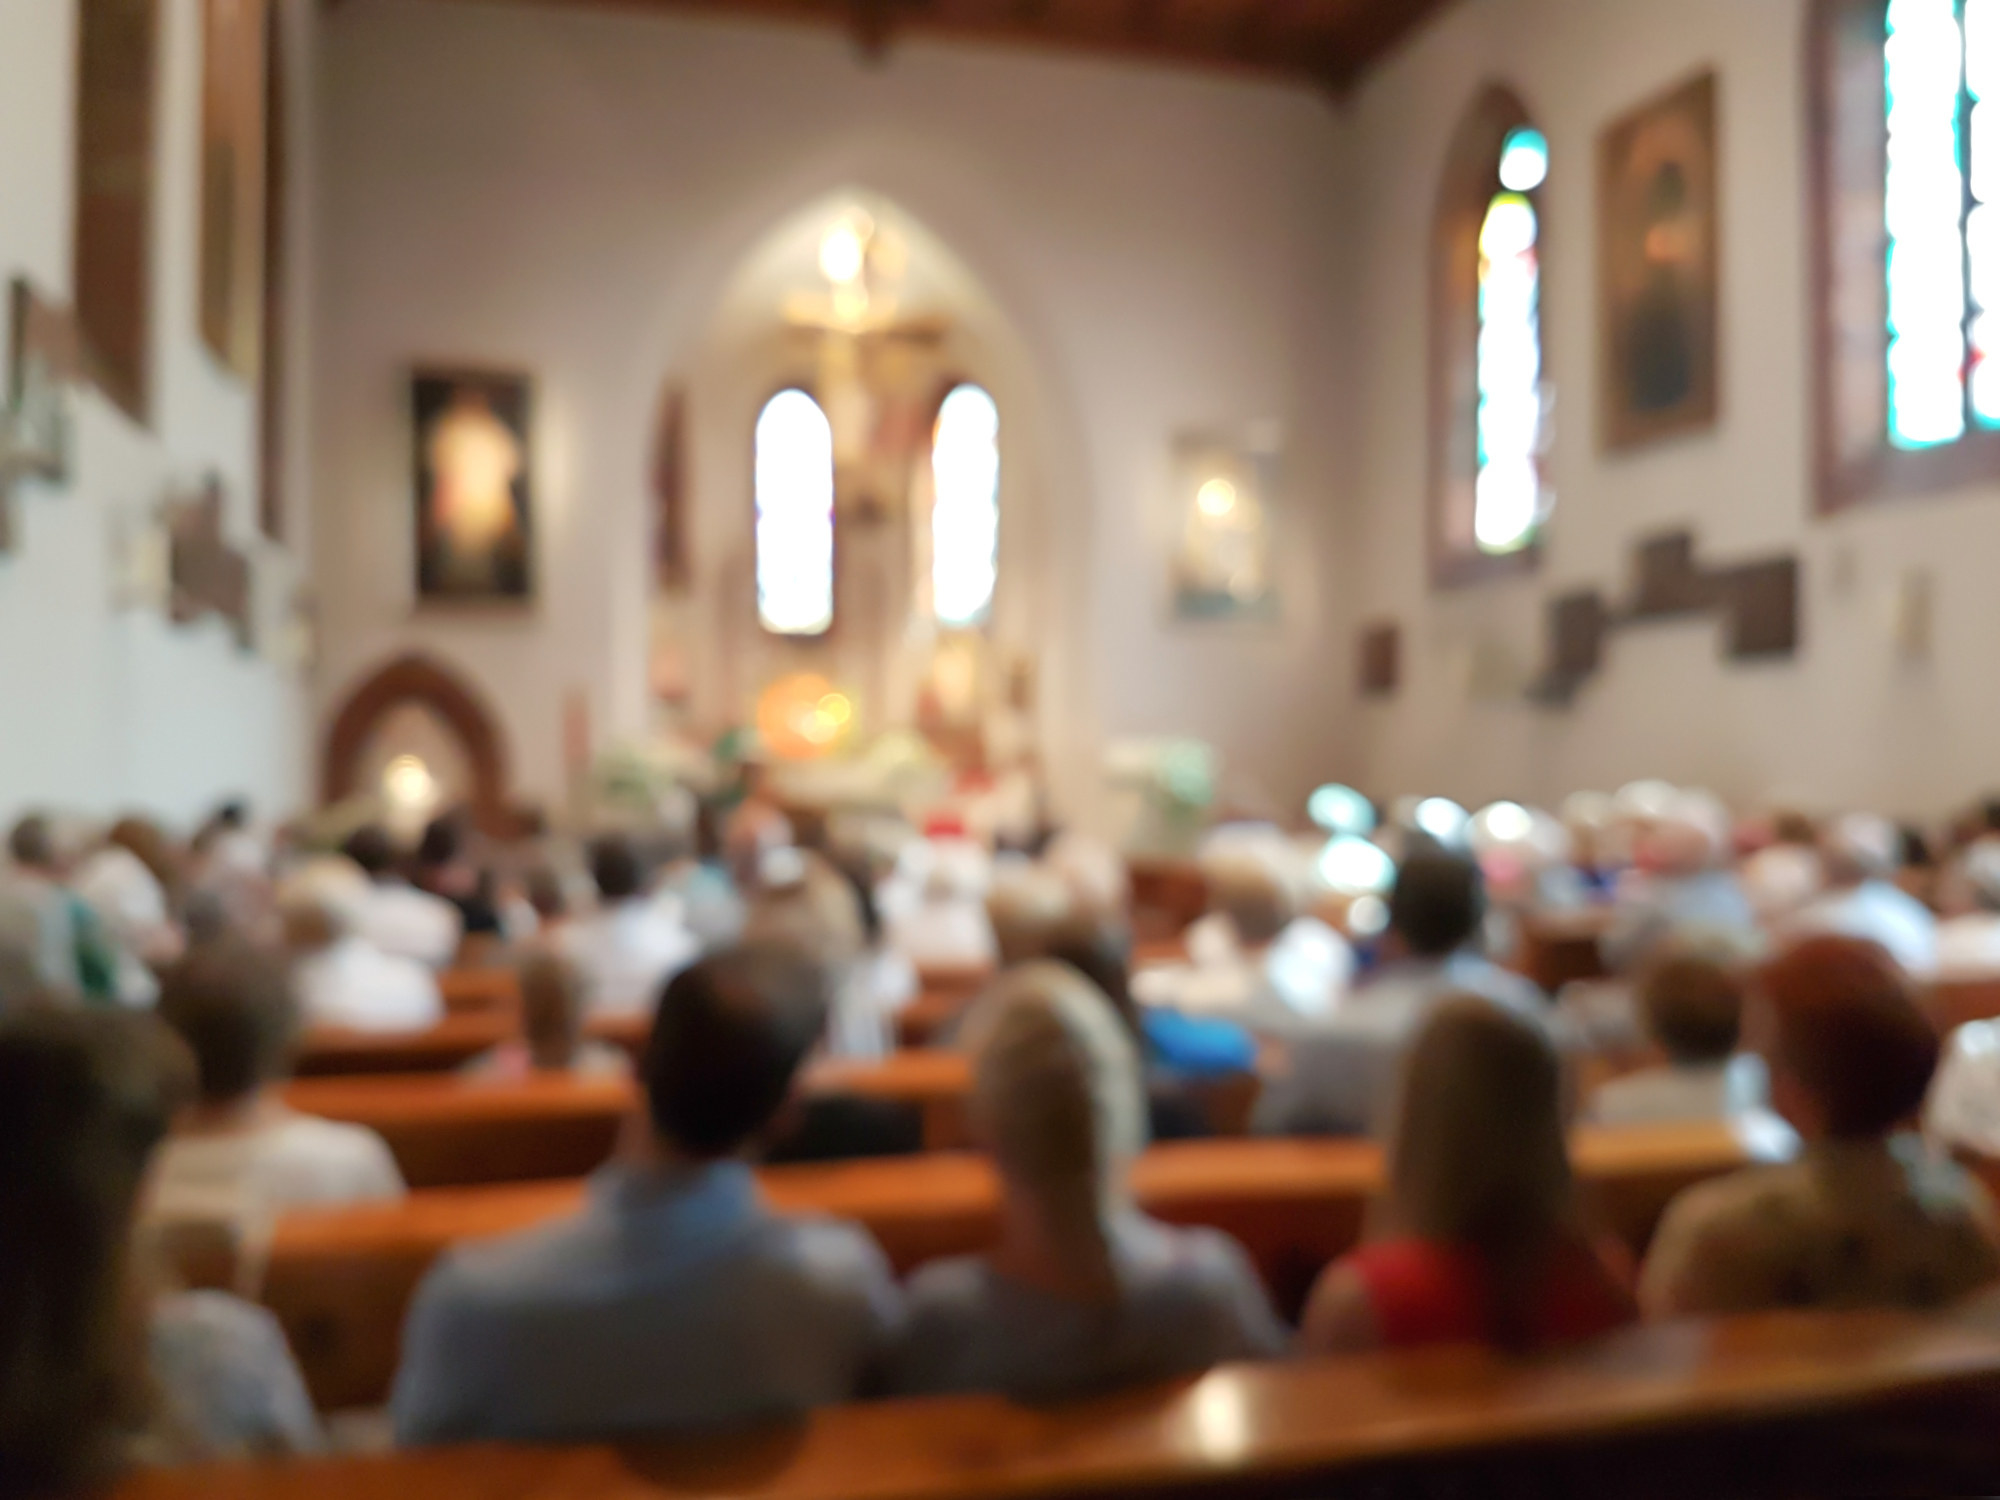 blurry photo of people at a church